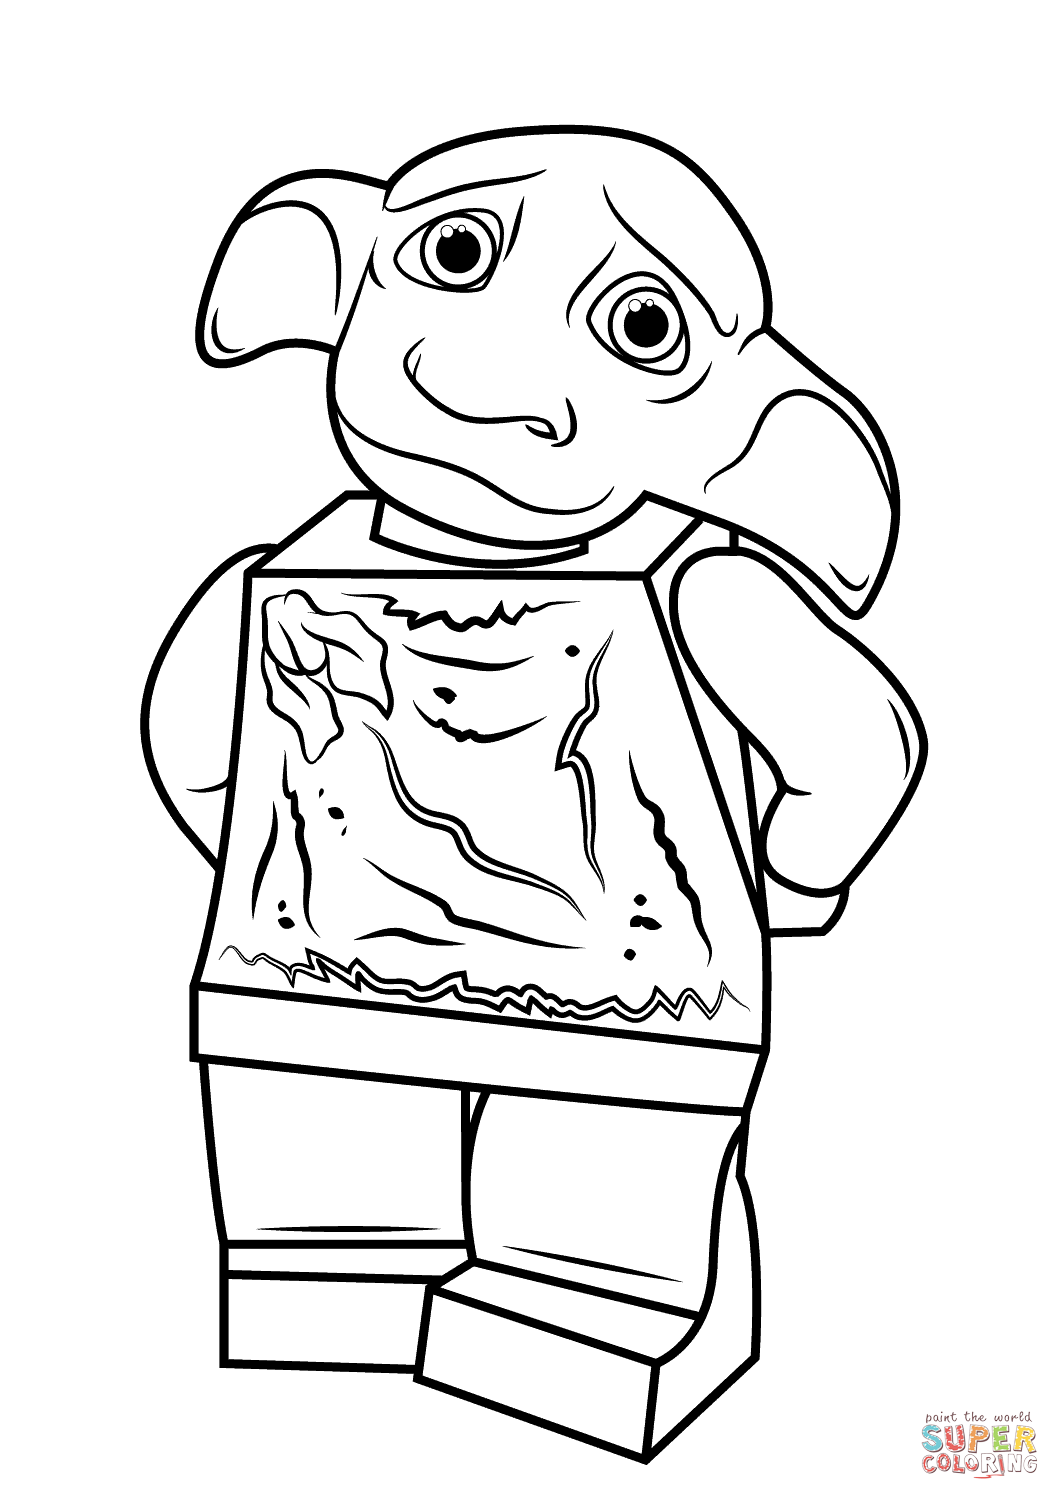 Lego Harry Potter Dobby coloring page | Free Printable Coloring Pages